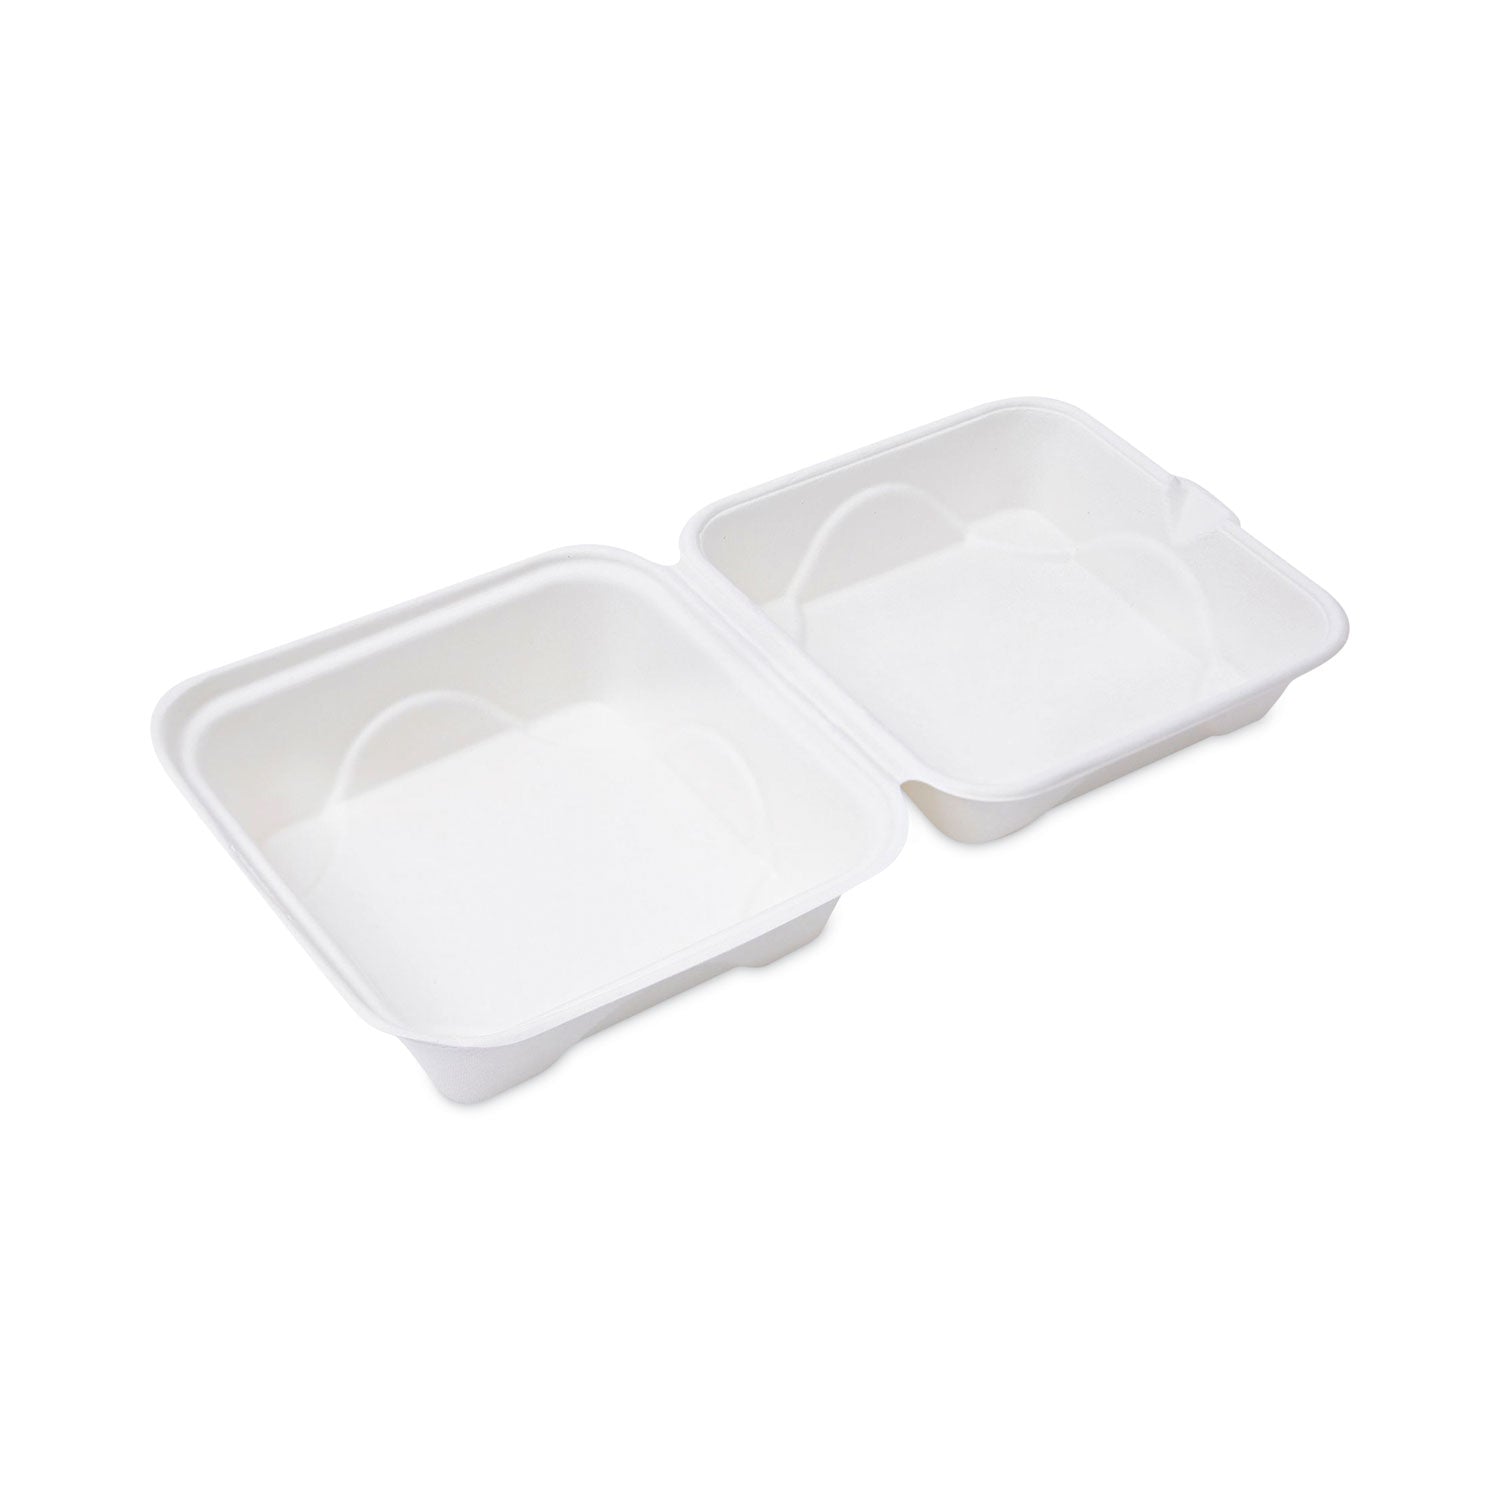 bagasse-hinged-clamshell-containers-6-x-6-x-3-white-sugarcane-50-pack-10-packs-carton_ecoephc6 - 1